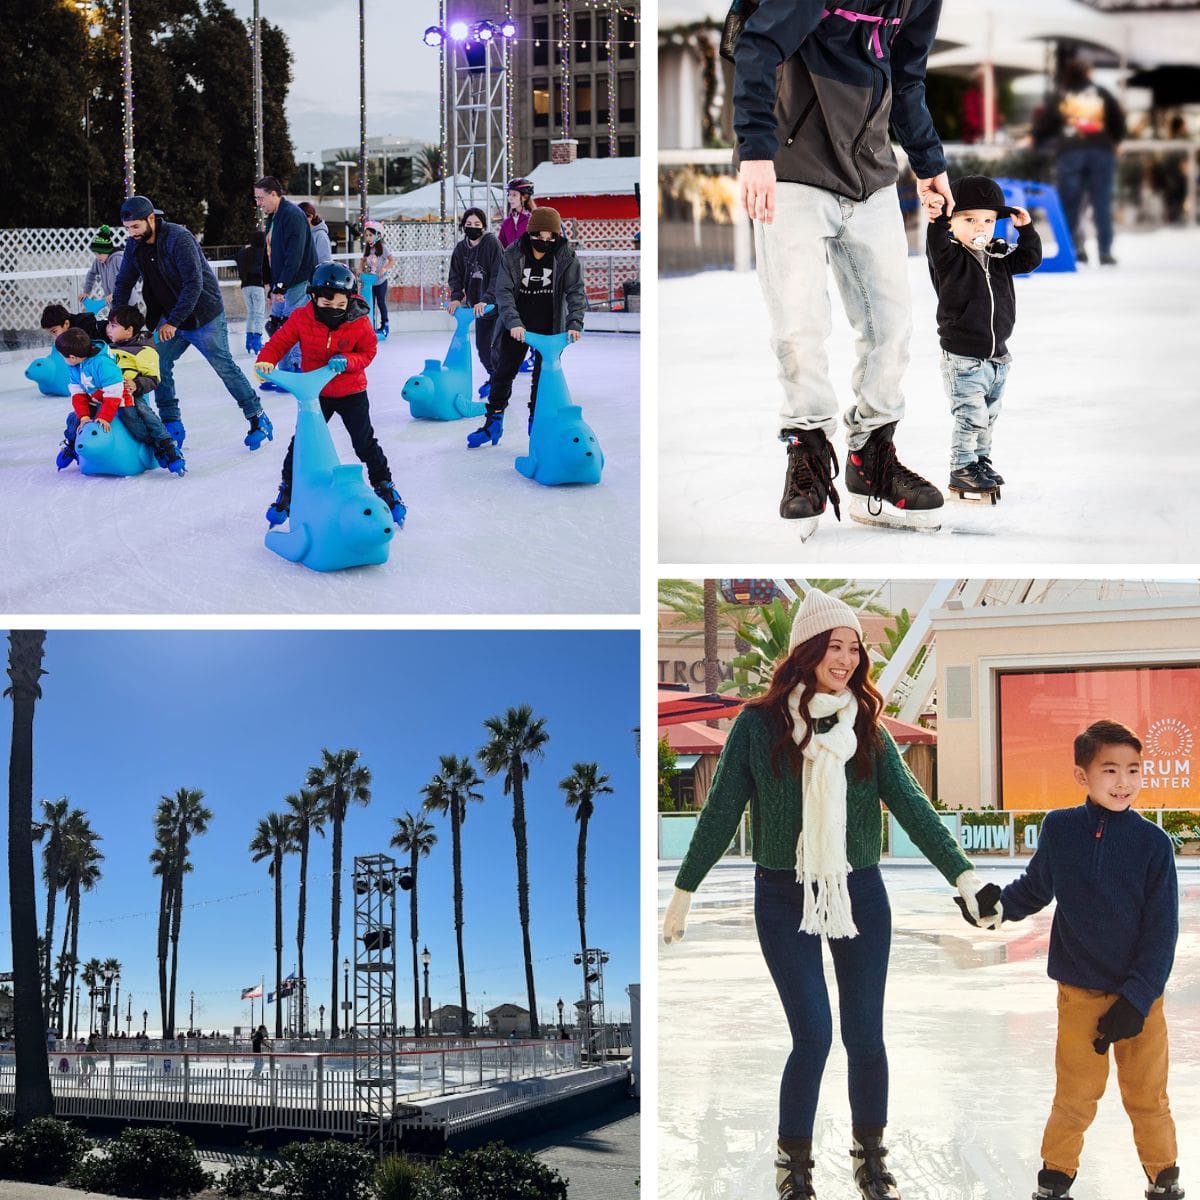 The Best Ice Skating Rinks For The Holiday Season